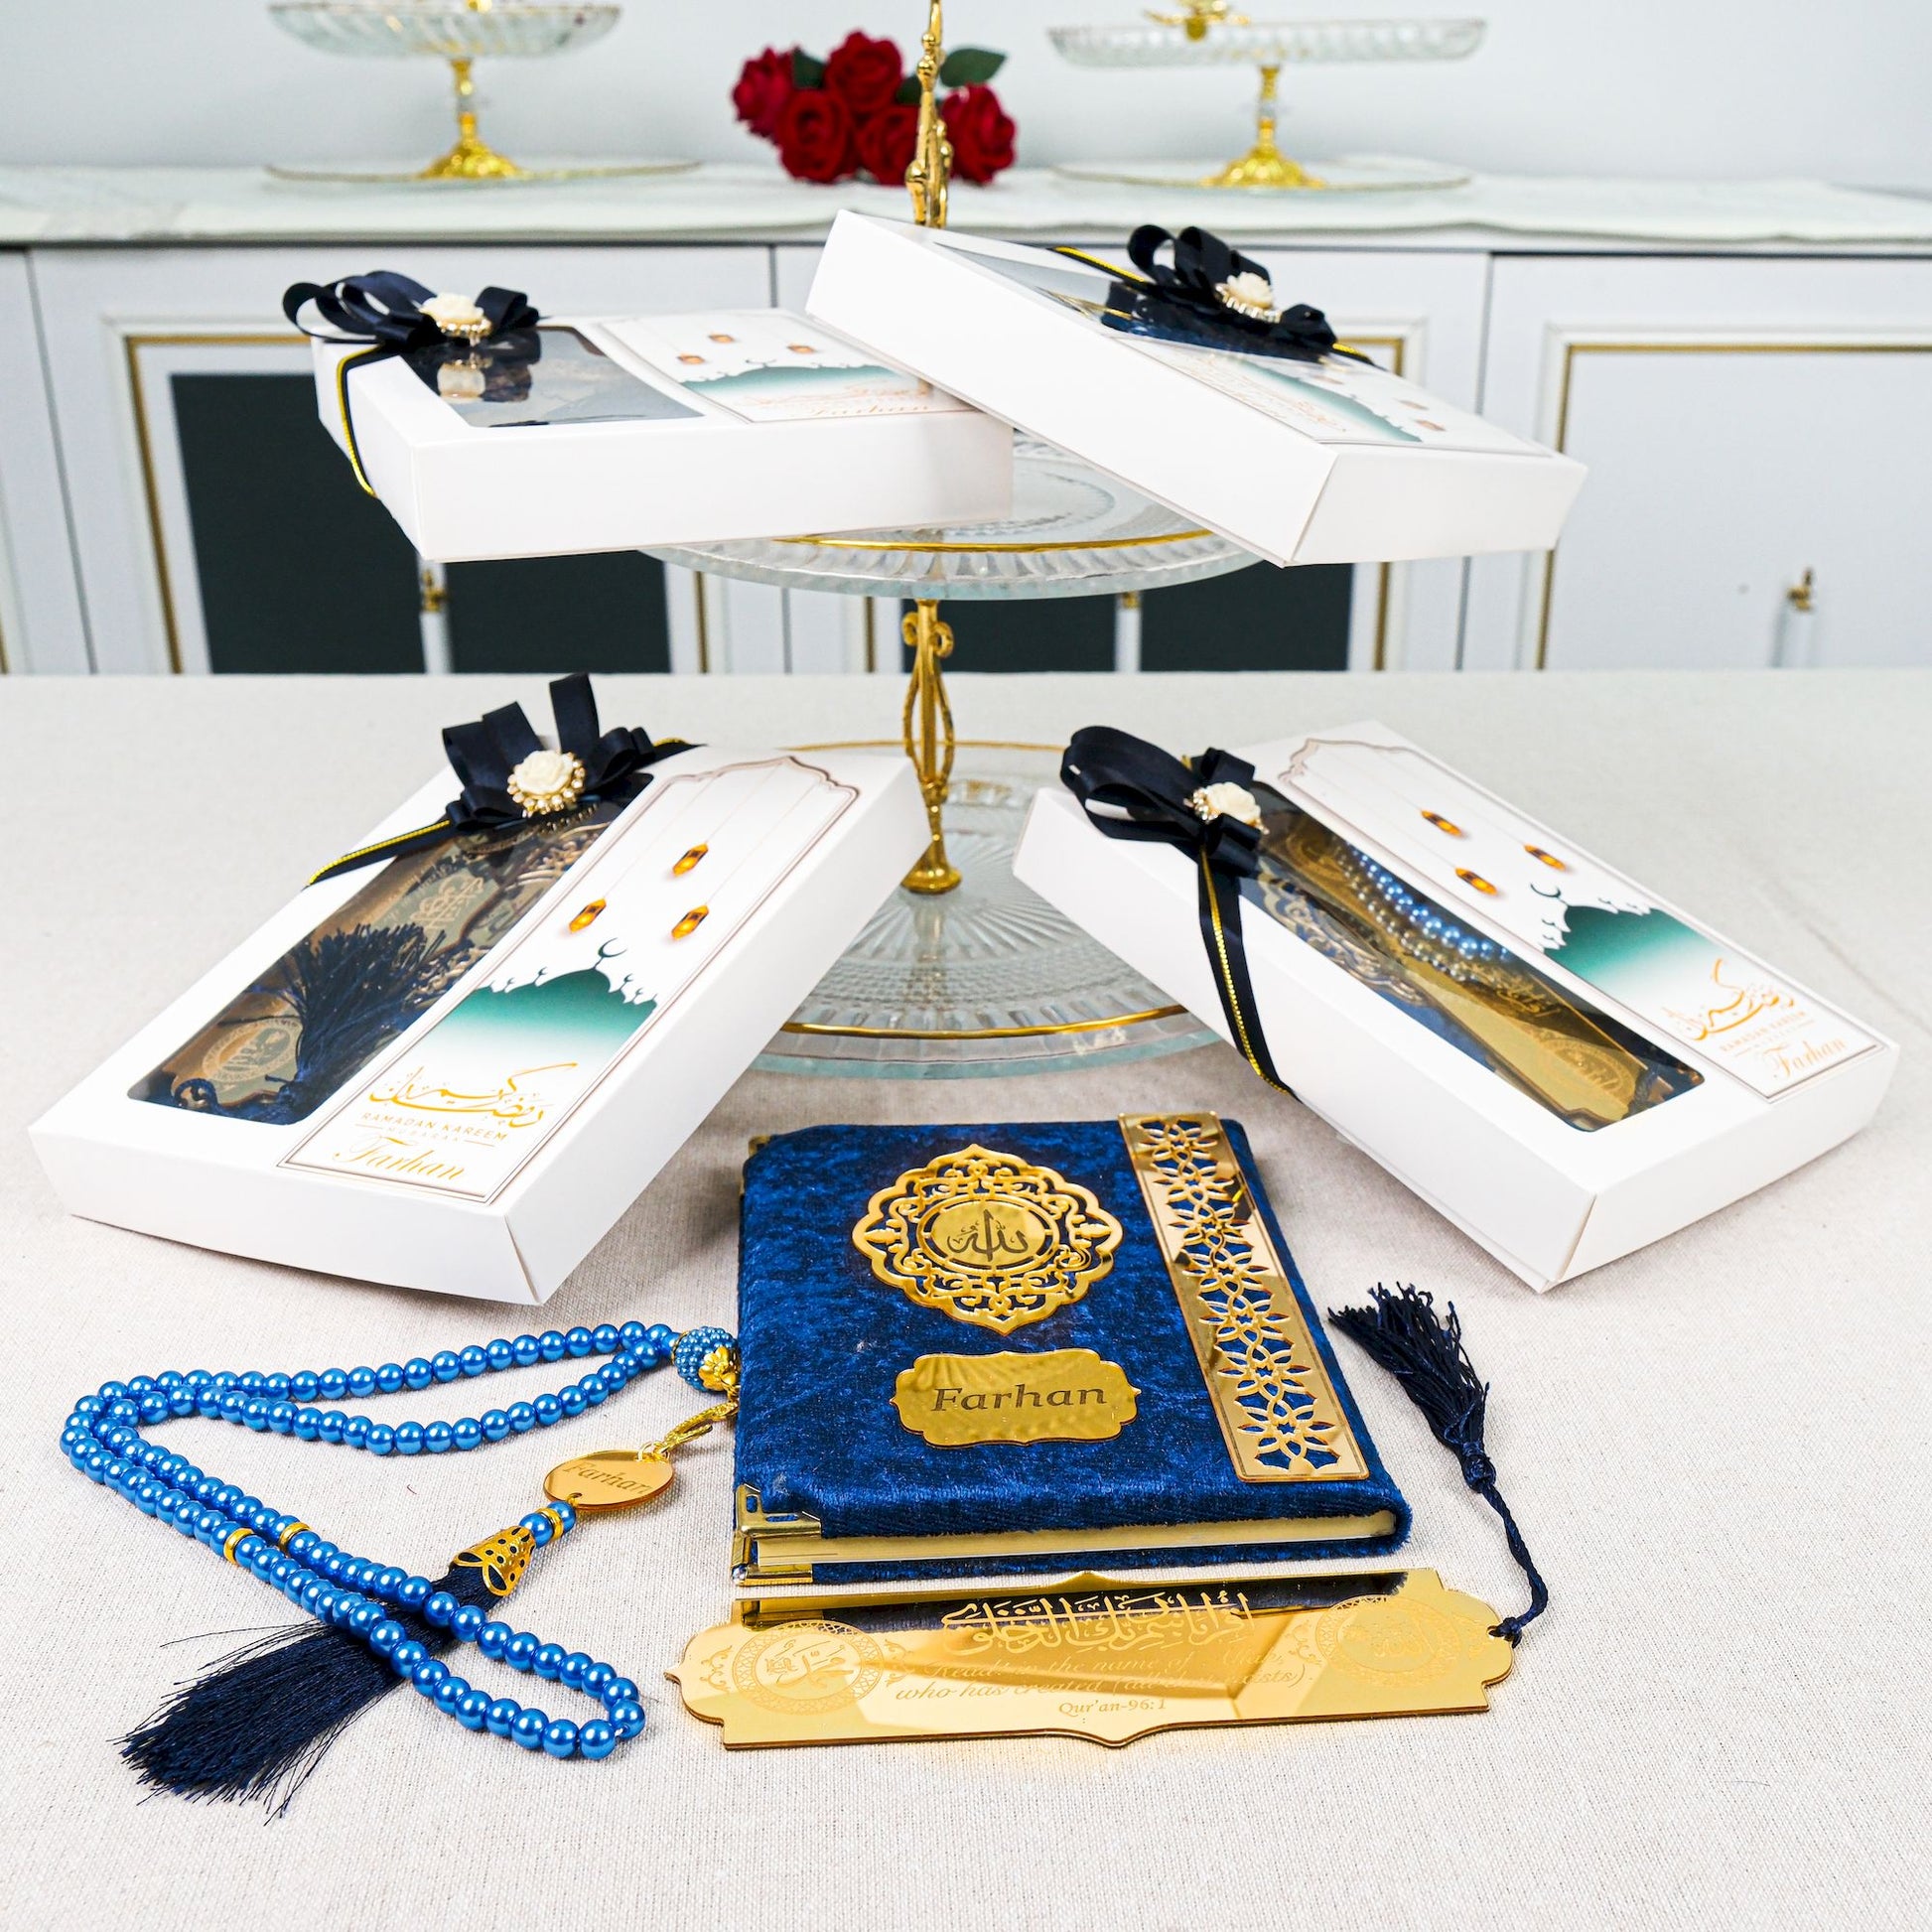 Personalized Yaseen Dua Book Bookmark Tasbeeh Islam Muslim Gift Set - Islamic Elite Favors is a handmade gift shop offering a wide variety of unique and personalized gifts for all occasions. Whether you're looking for the perfect Ramadan, Eid, Hajj, wedding gift or something special for a birthday, baby shower or anniversary, we have something for everyone. High quality, made with love.